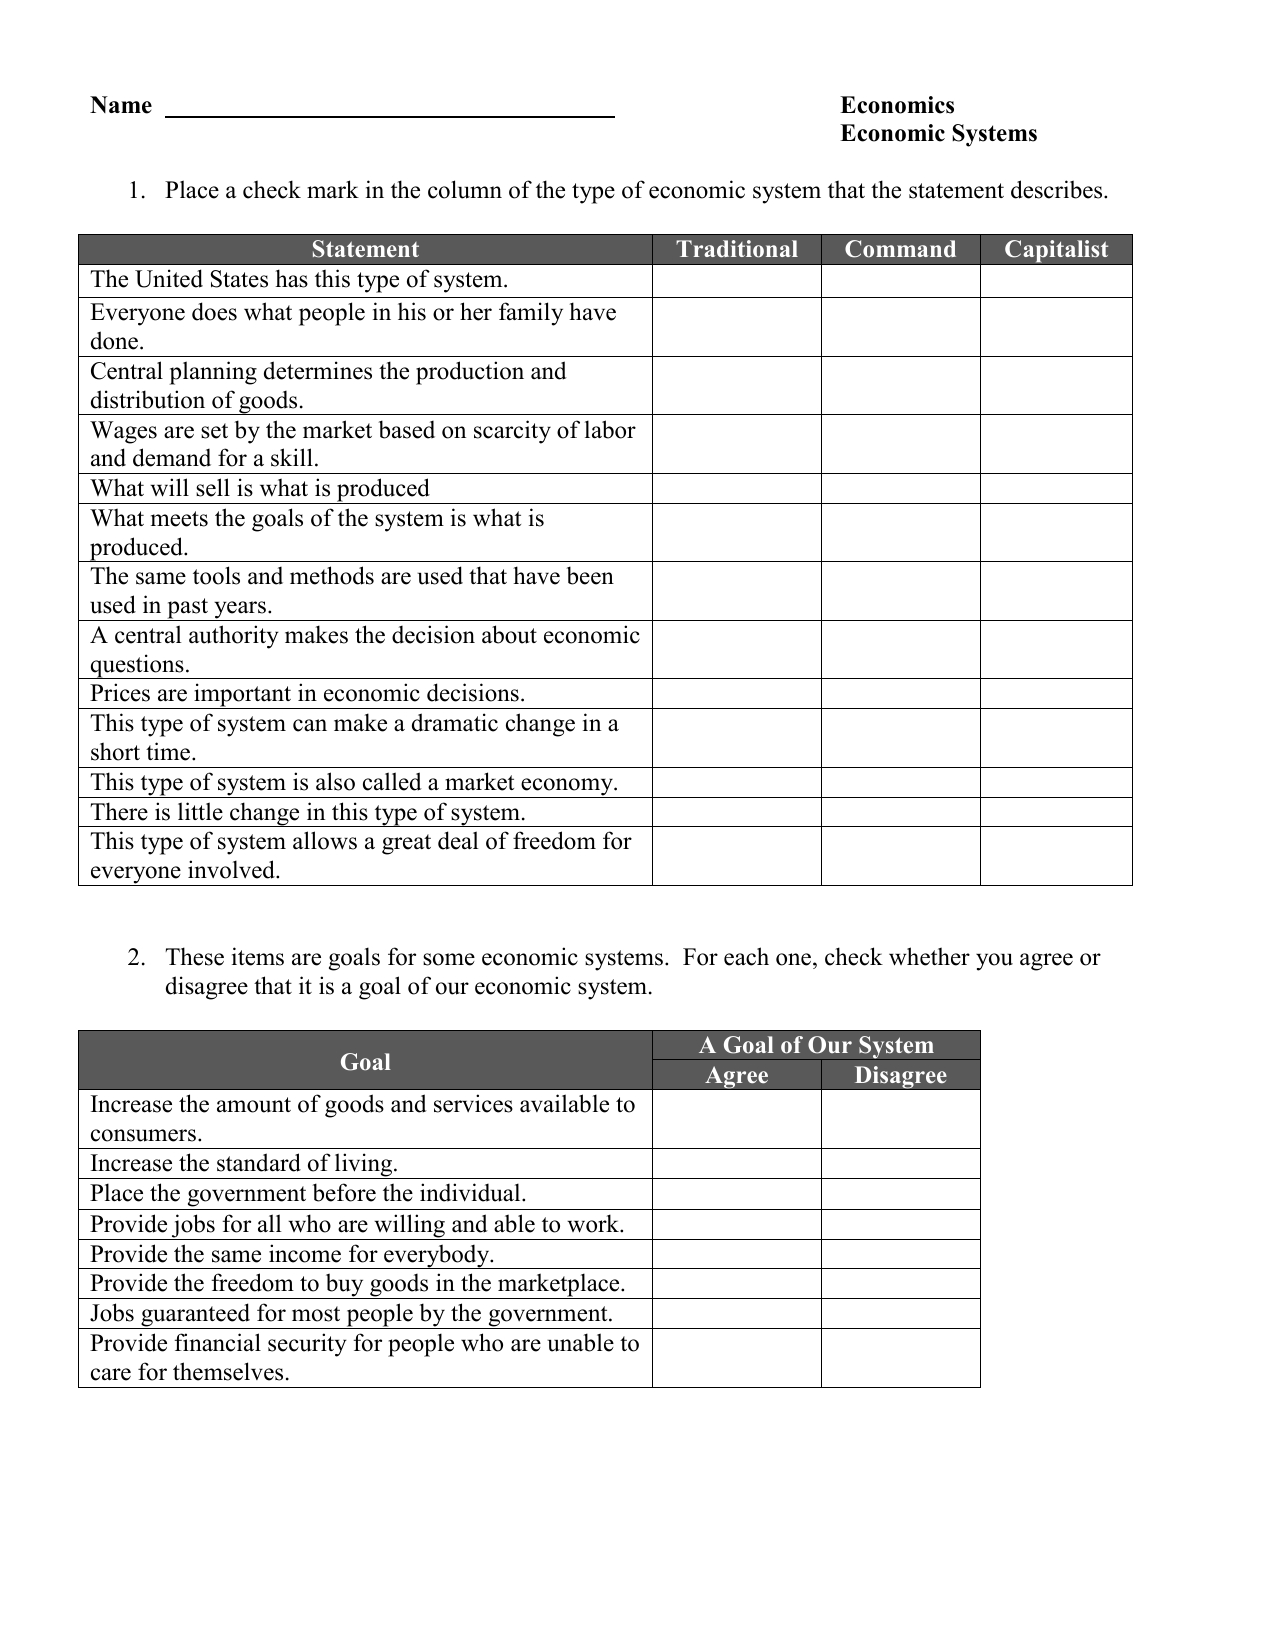 economic-systems-worksheet-db-excel